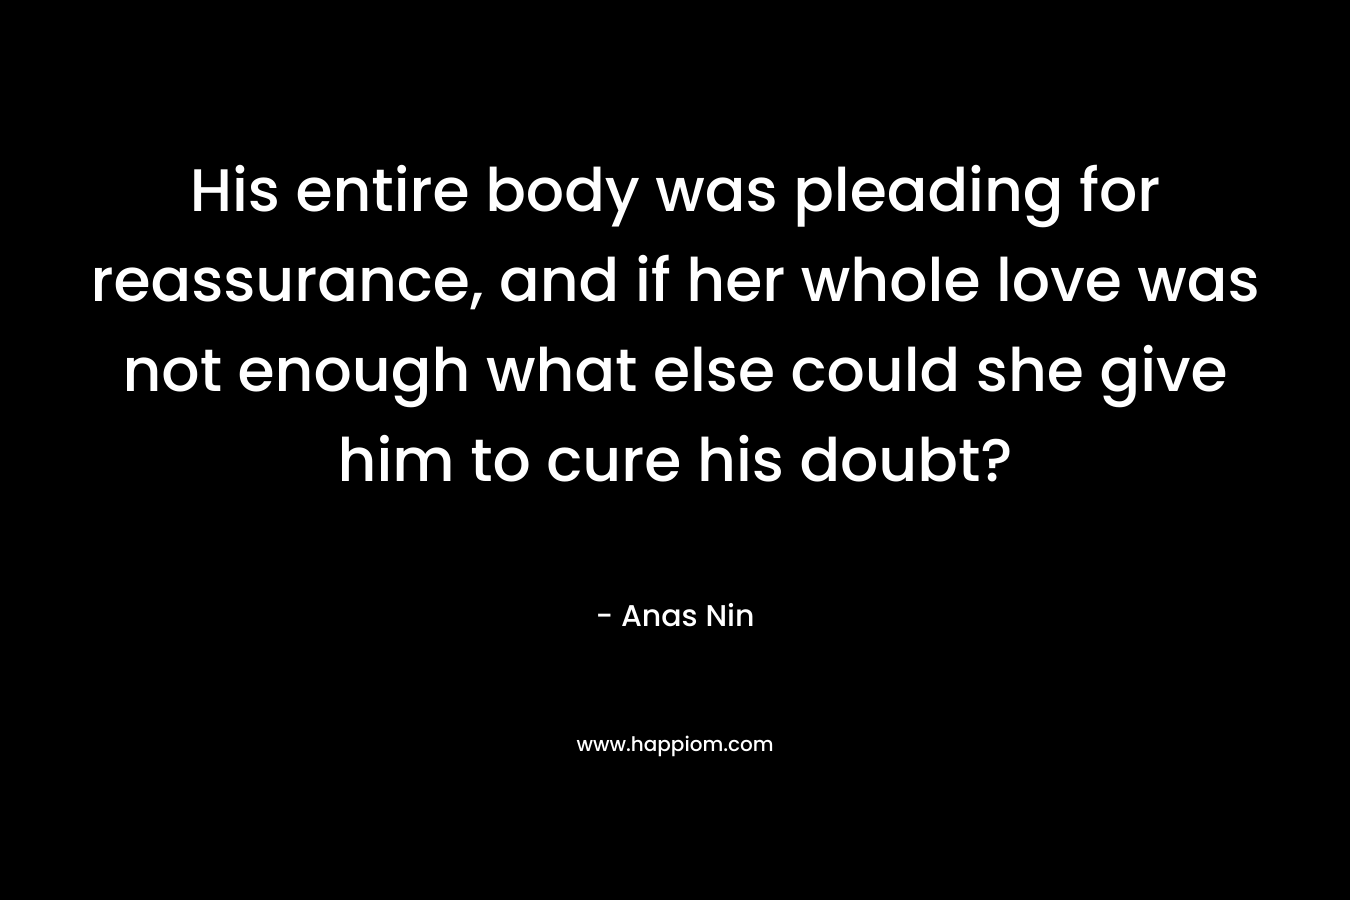 His entire body was pleading for reassurance, and if her whole love was not enough what else could she give him to cure his doubt? – Anas Nin